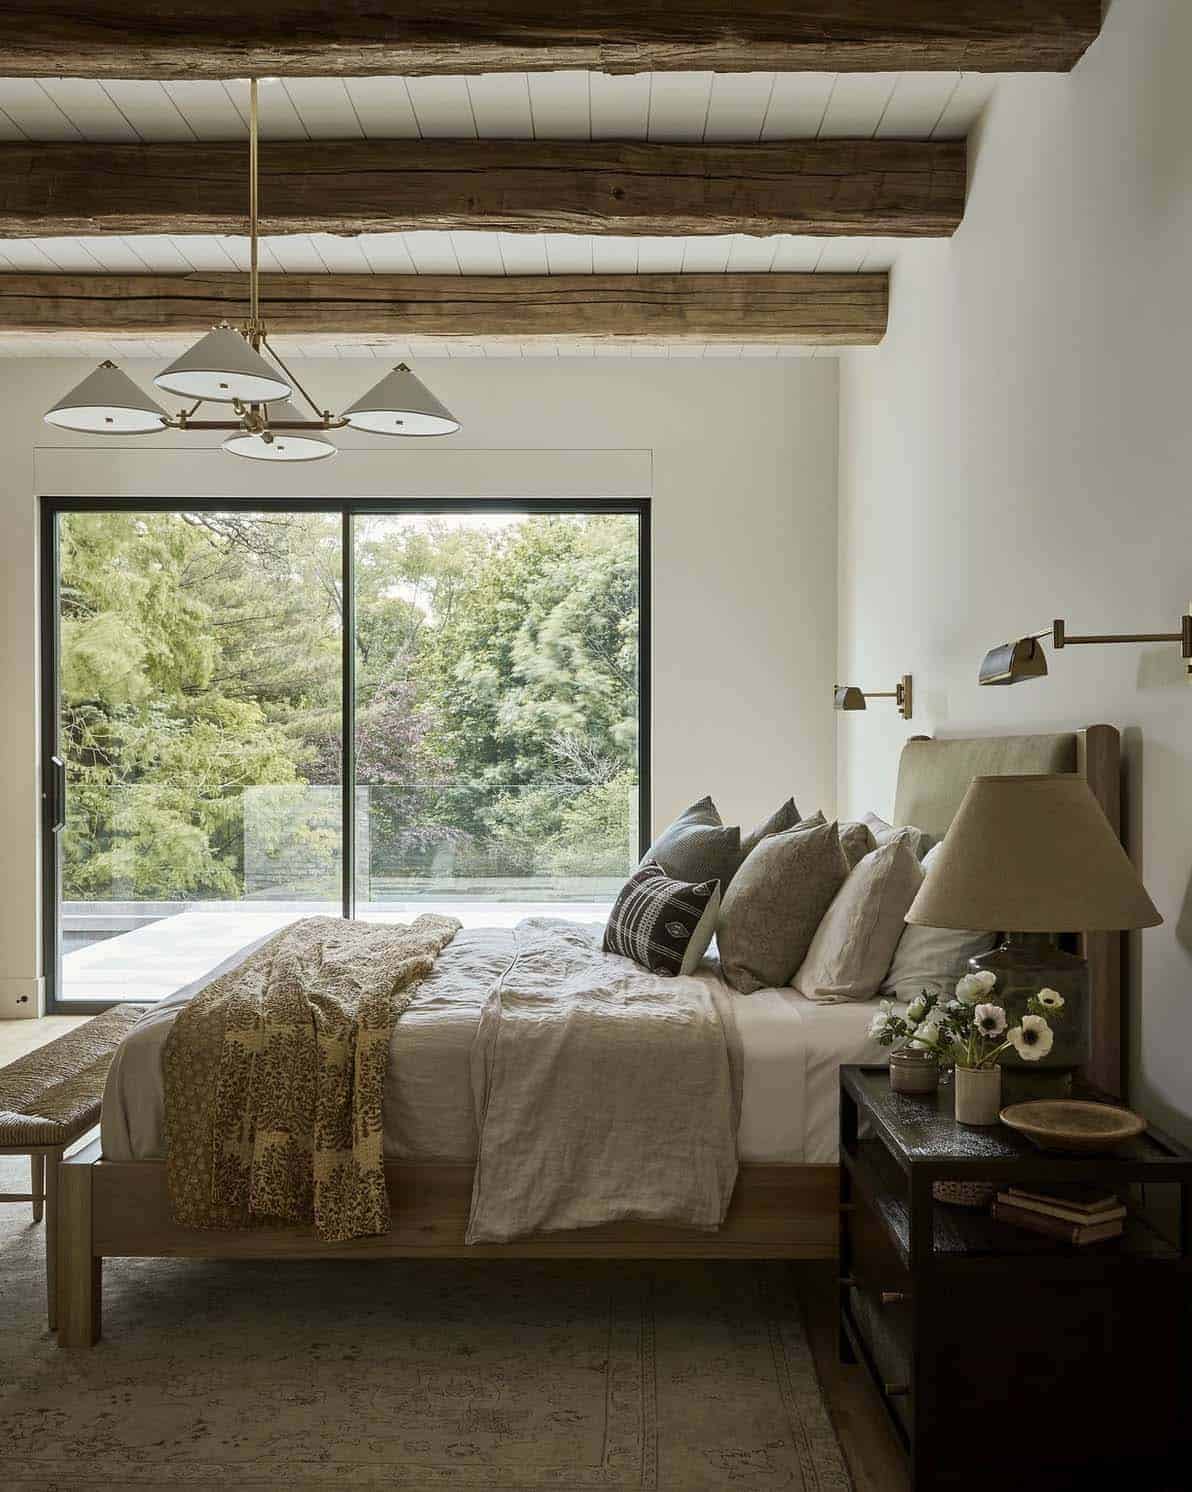 transitional style bedroom with wood beam ceiling and sliding glass doors